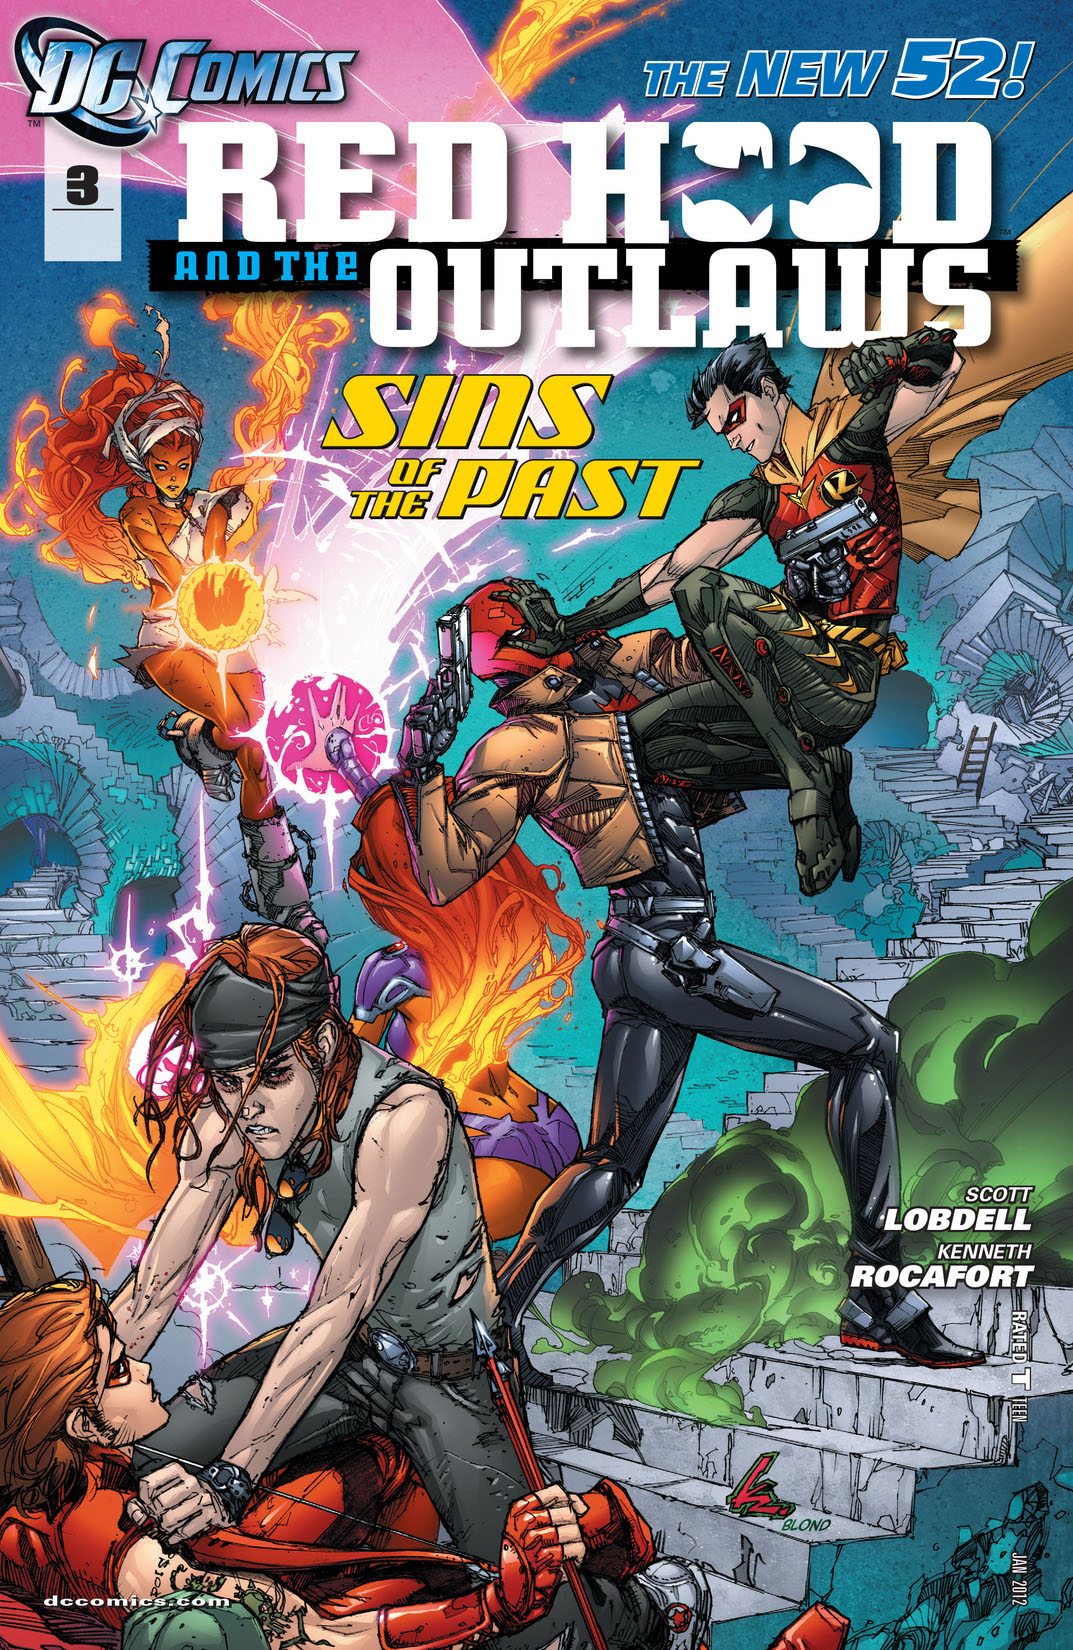 Red Hood and the Outlaws (2011-) #3 preview images